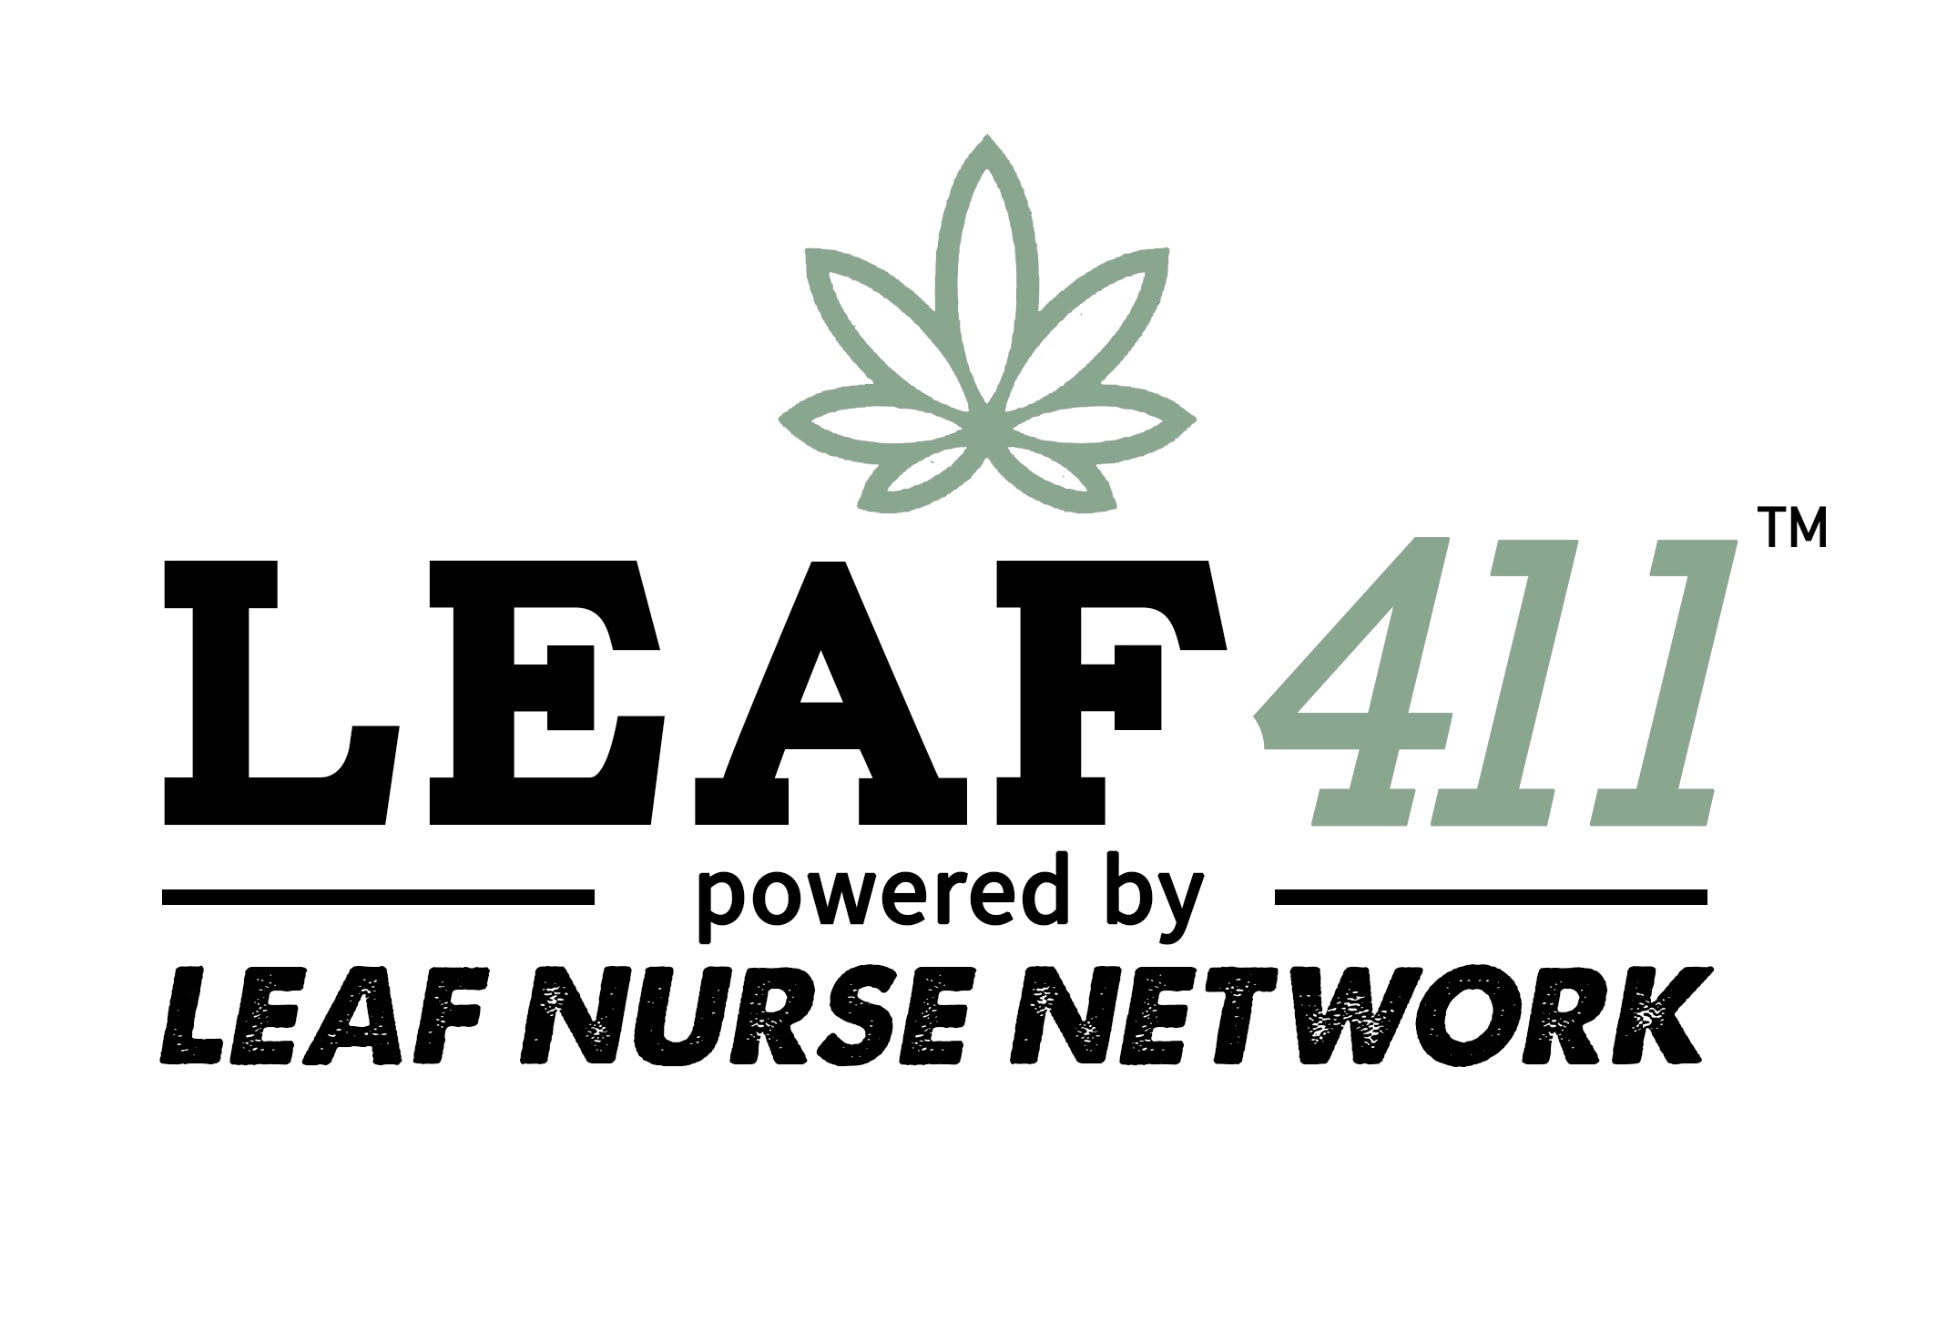 Mission Dispensaries Joins Leaf411 to Advance Cannabis Education in Illinois, Michigan and Massachusetts